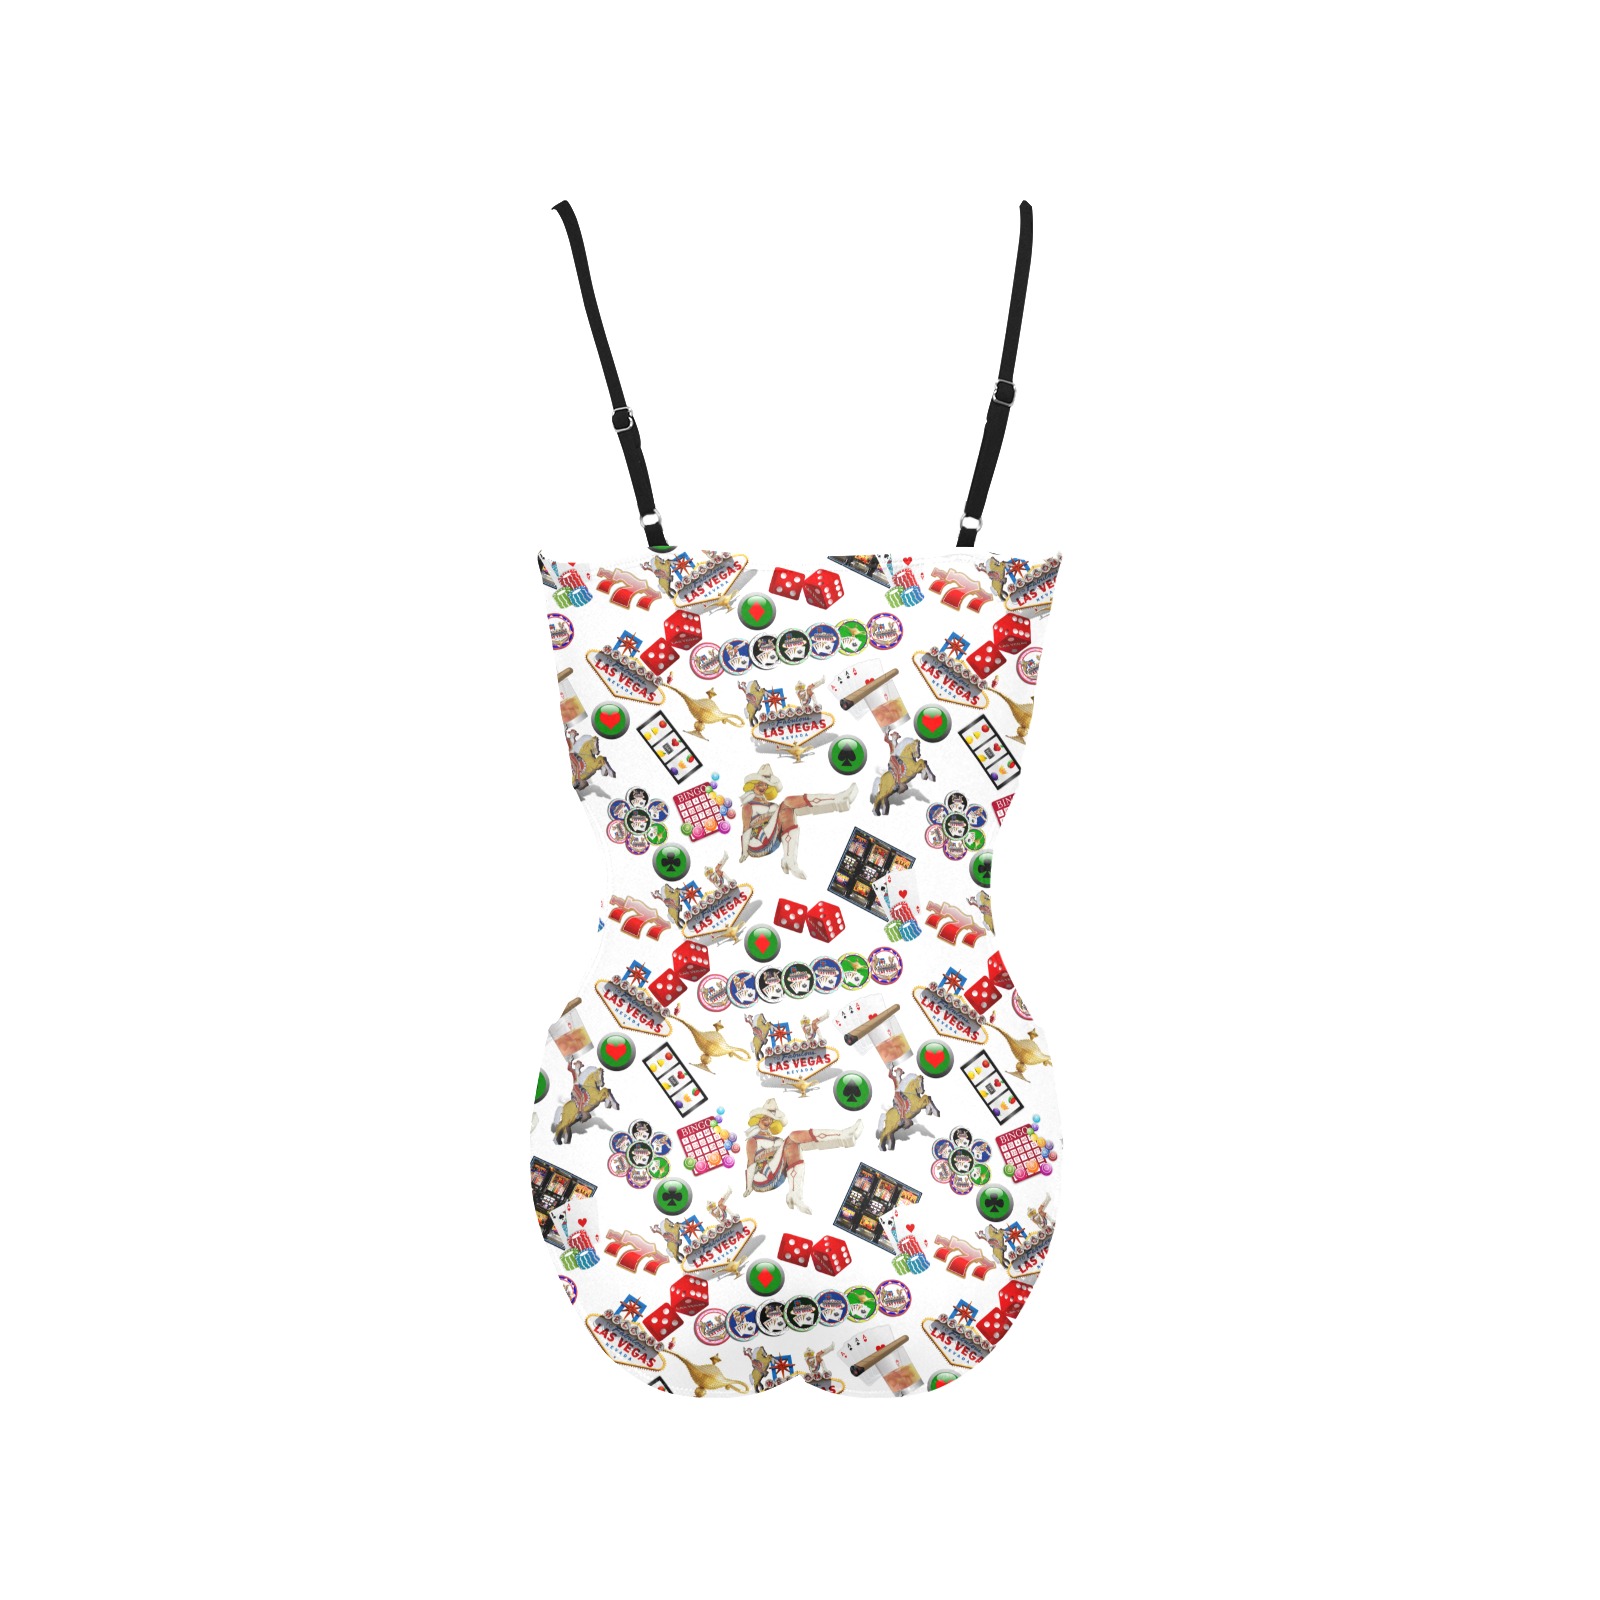 Las Vegas Icons - Gamblers Delight / White Spaghetti Strap Cut Out Sides Swimsuit (Model S28)